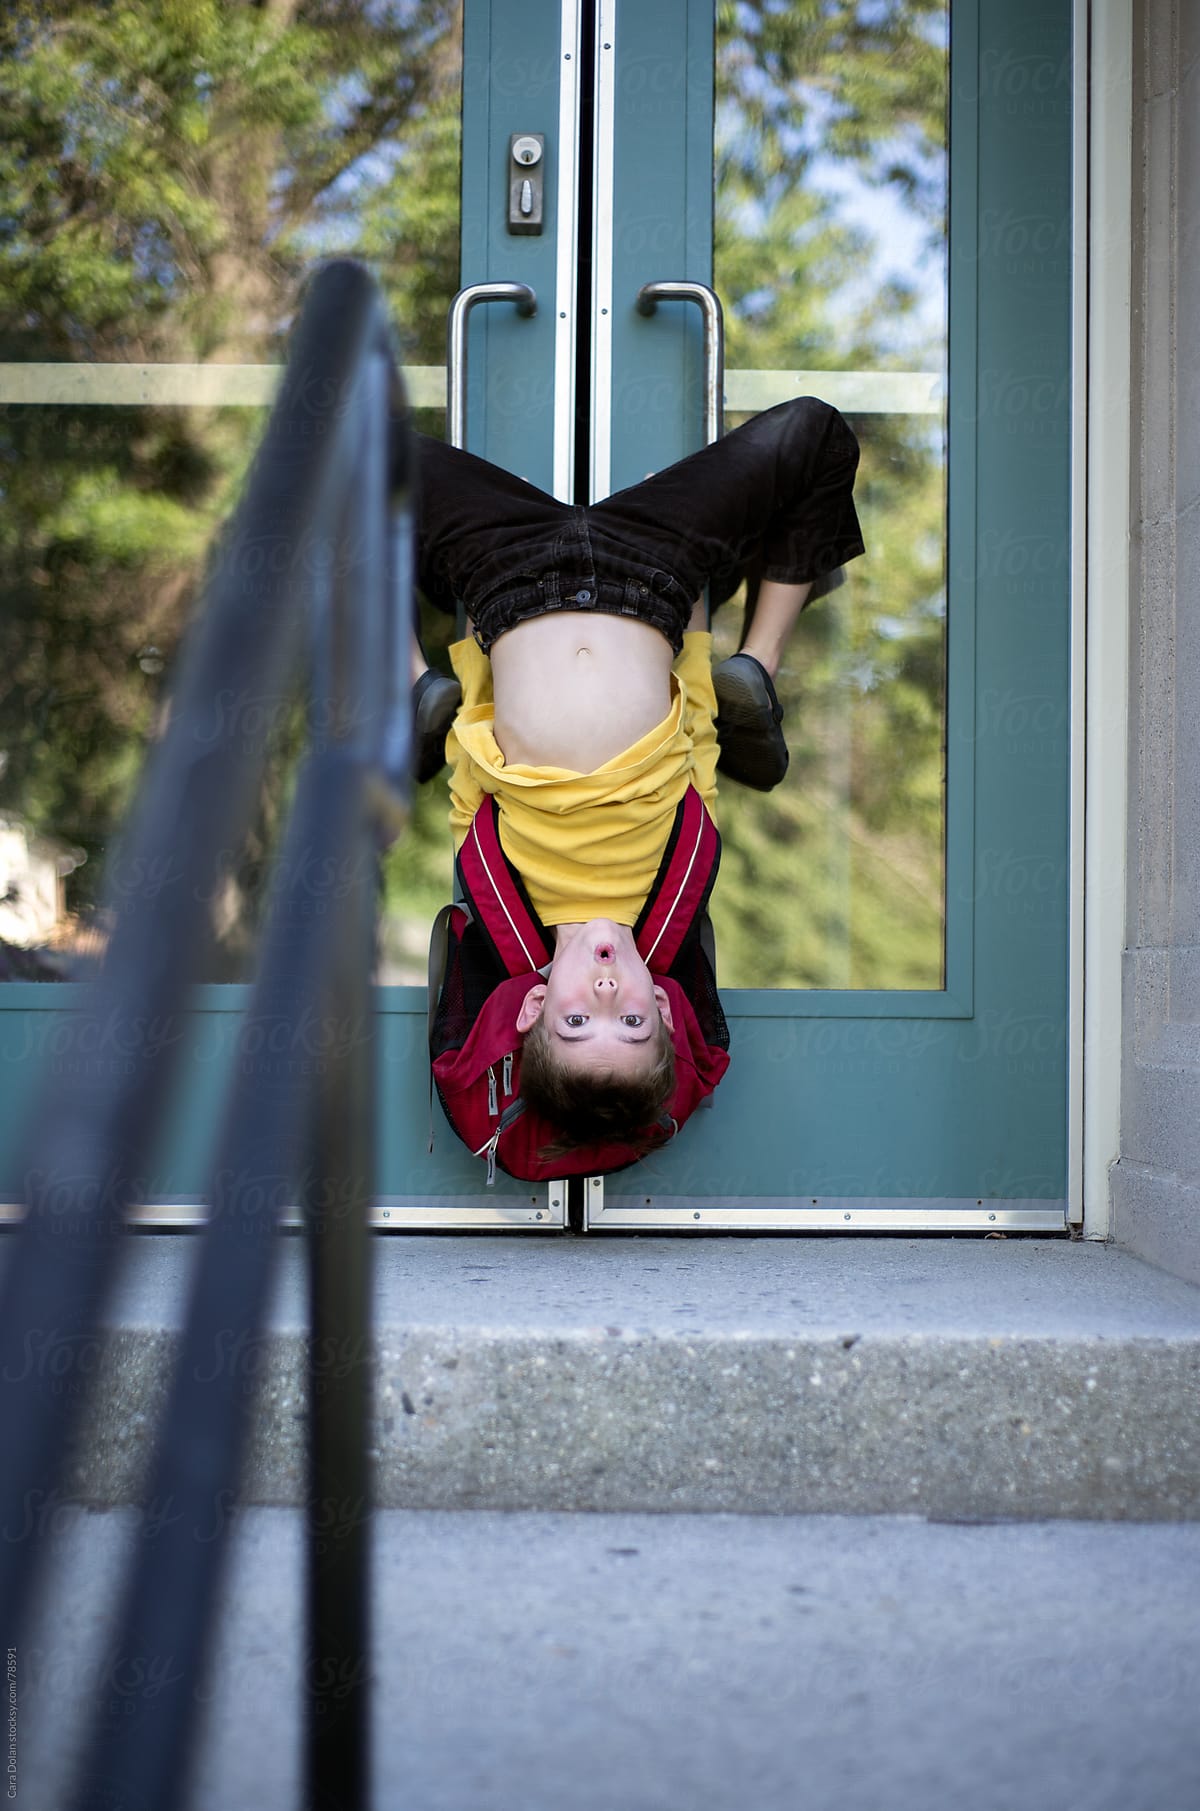 Silly Child Hangs Upside Down On The Doors Of A School by Cara Dolan